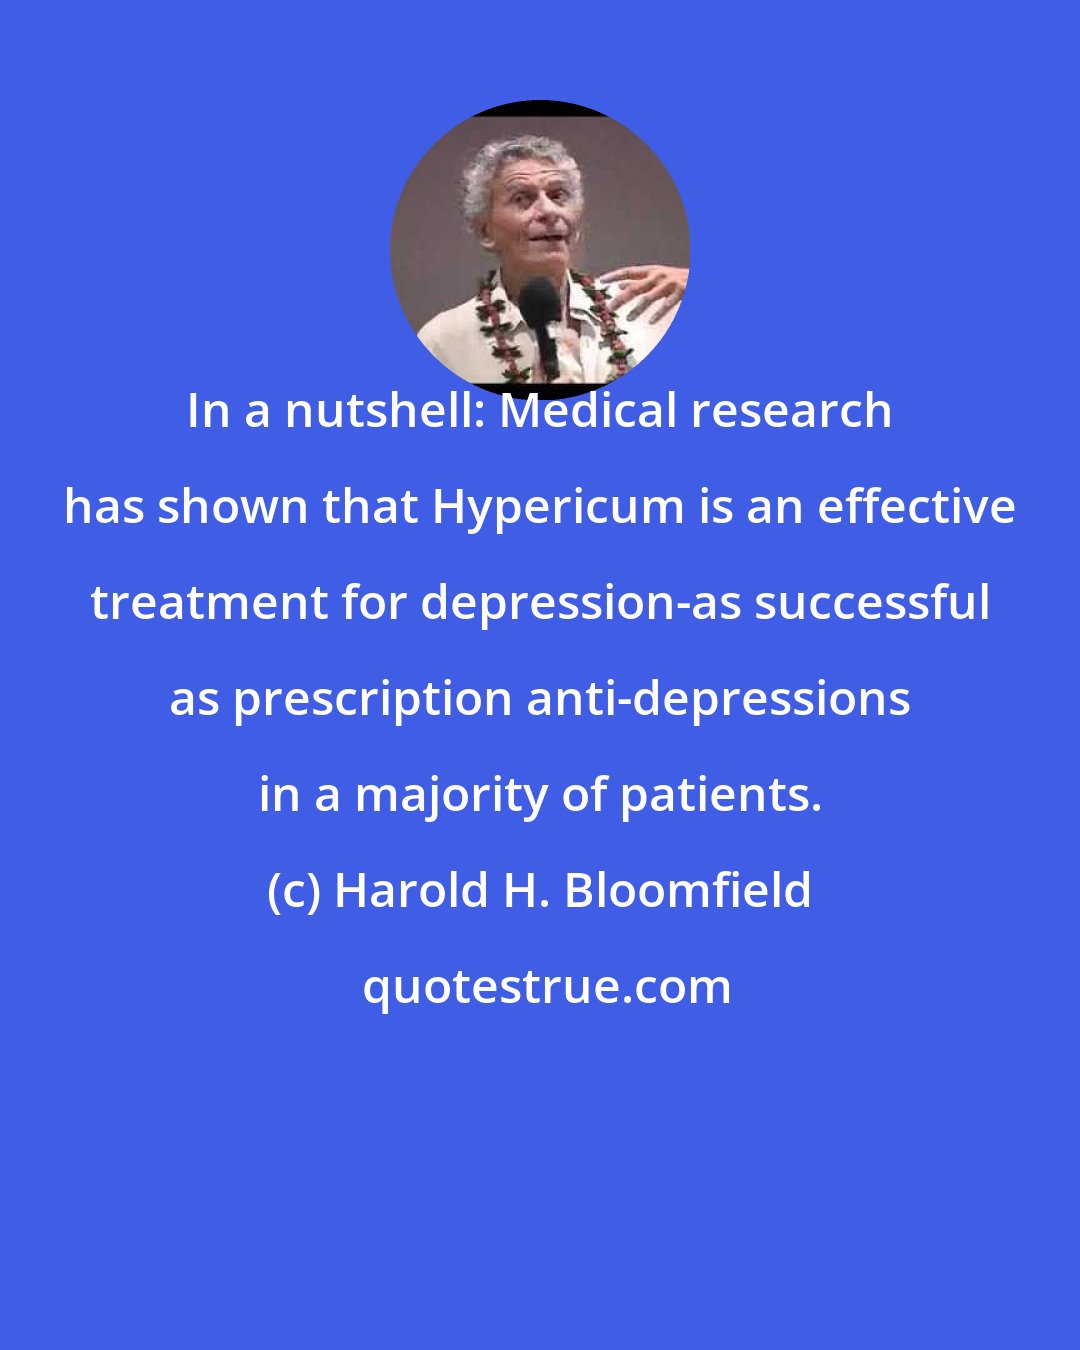 Harold H. Bloomfield: In a nutshell: Medical research has shown that Hypericum is an effective treatment for depression-as successful as prescription anti-depressions in a majority of patients.